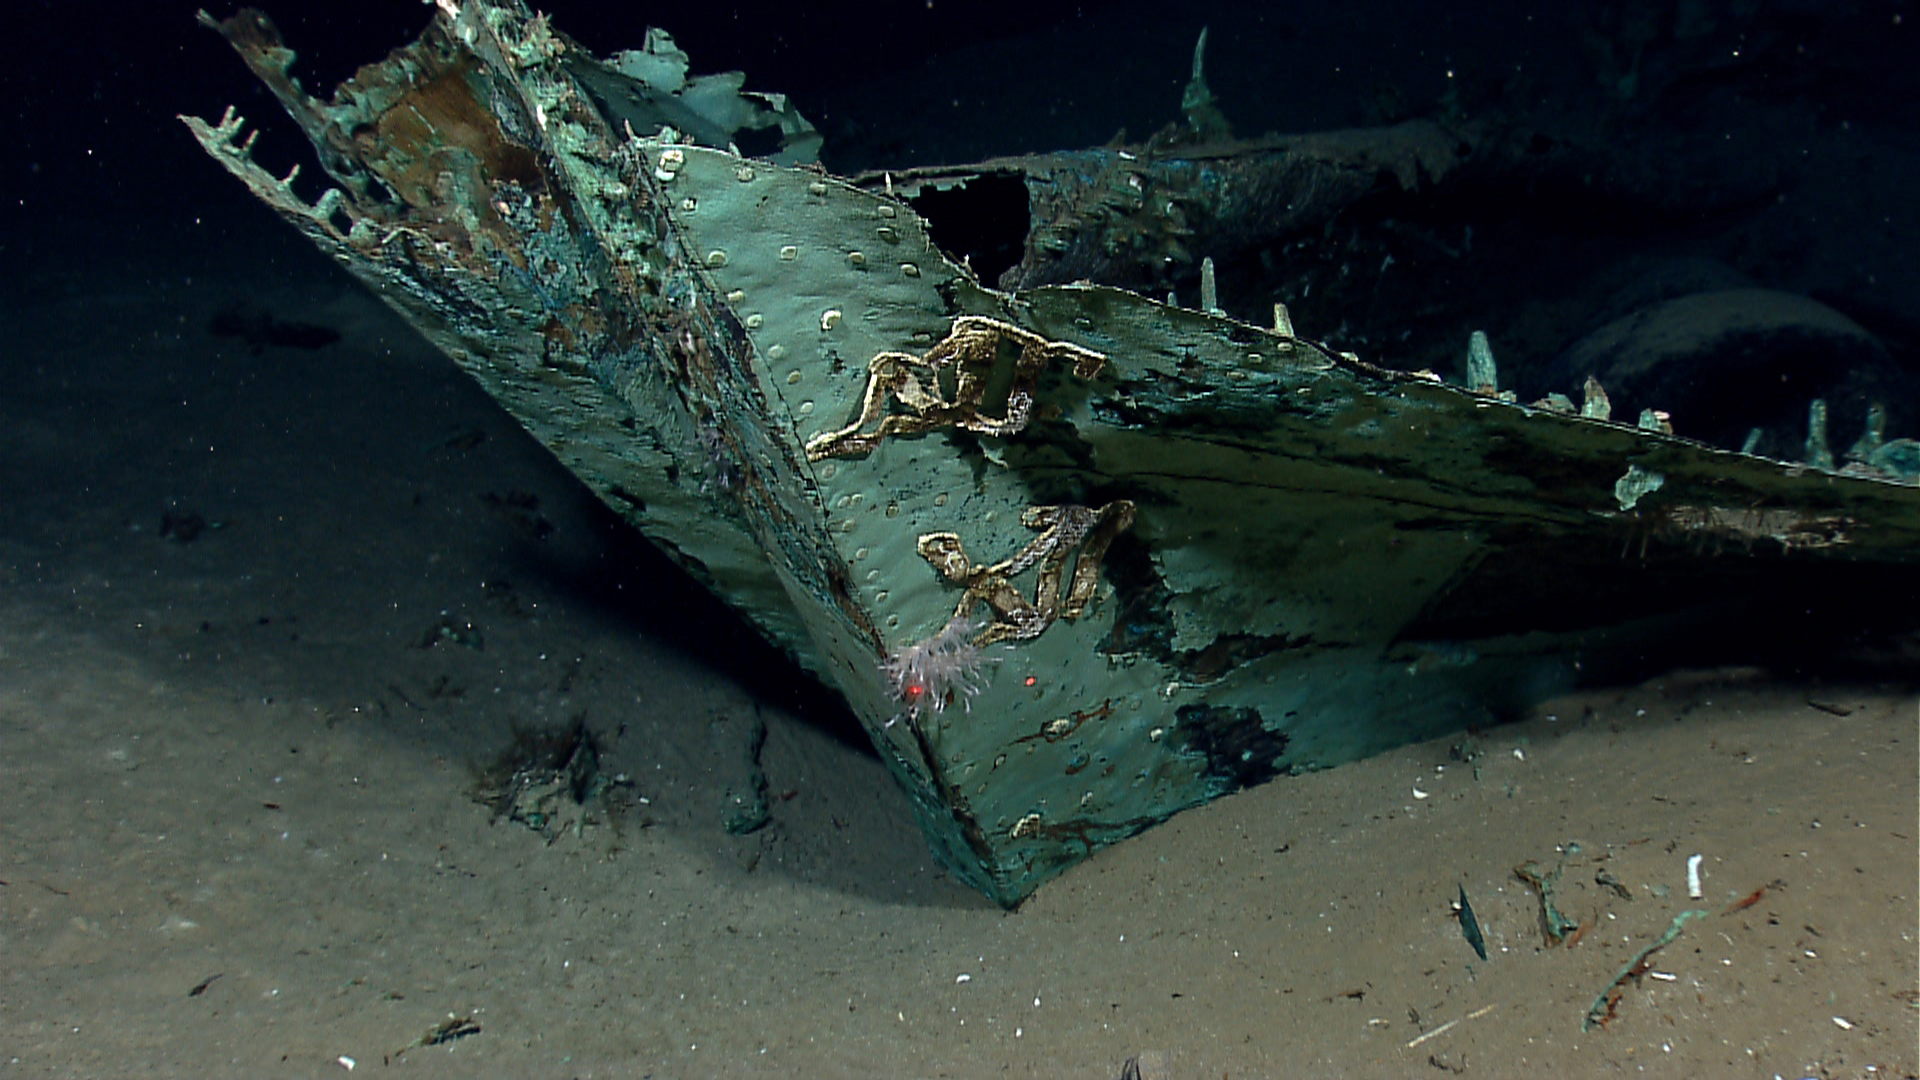 Copper sheathing covers the stern post and aft part of the lower hull of this wreck (Site 15577) discovered in the Gulf of Mexico. The rudder attached to the stern post has been twisted around to the left, or port side, making it difficult to see in this image. This type of damage suggests the vessel impacted the seafloor sternfirst, displacing the rudder. Two draft marks made of lead are visible on the stern post.